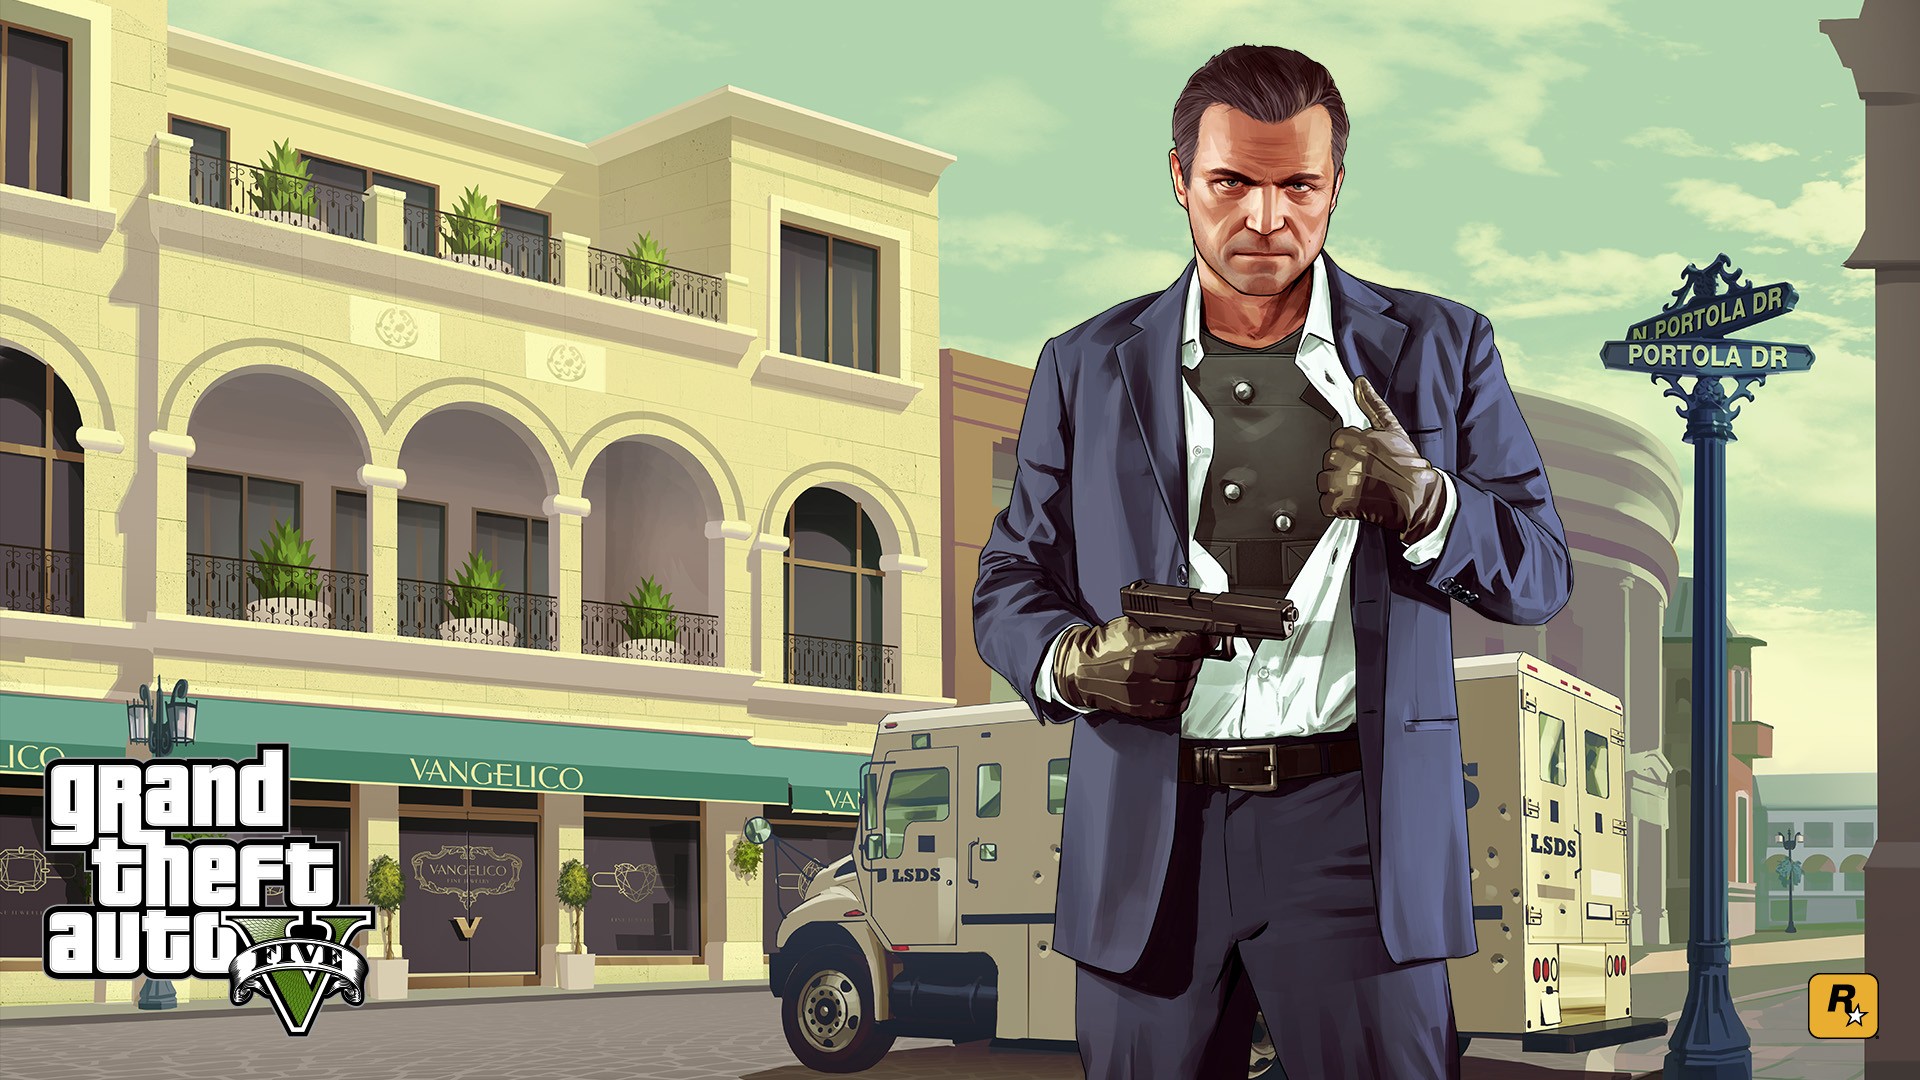 Grand Theft Auto V, Rockstar Games, Video Game Characters Wallpaper